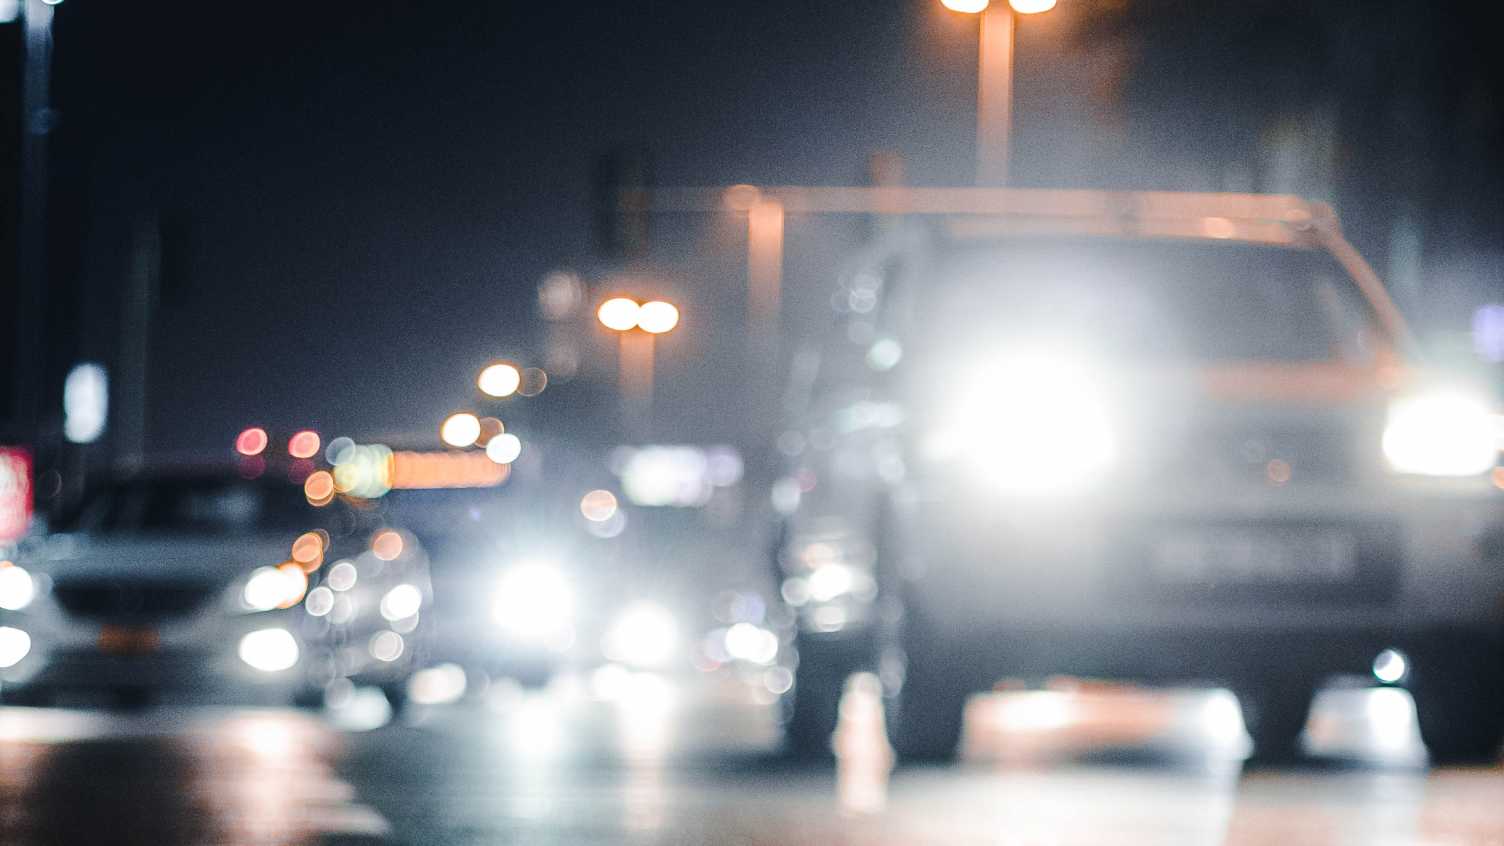 Thumbnail for Investigating road lighting and the effects on safety | Architecture